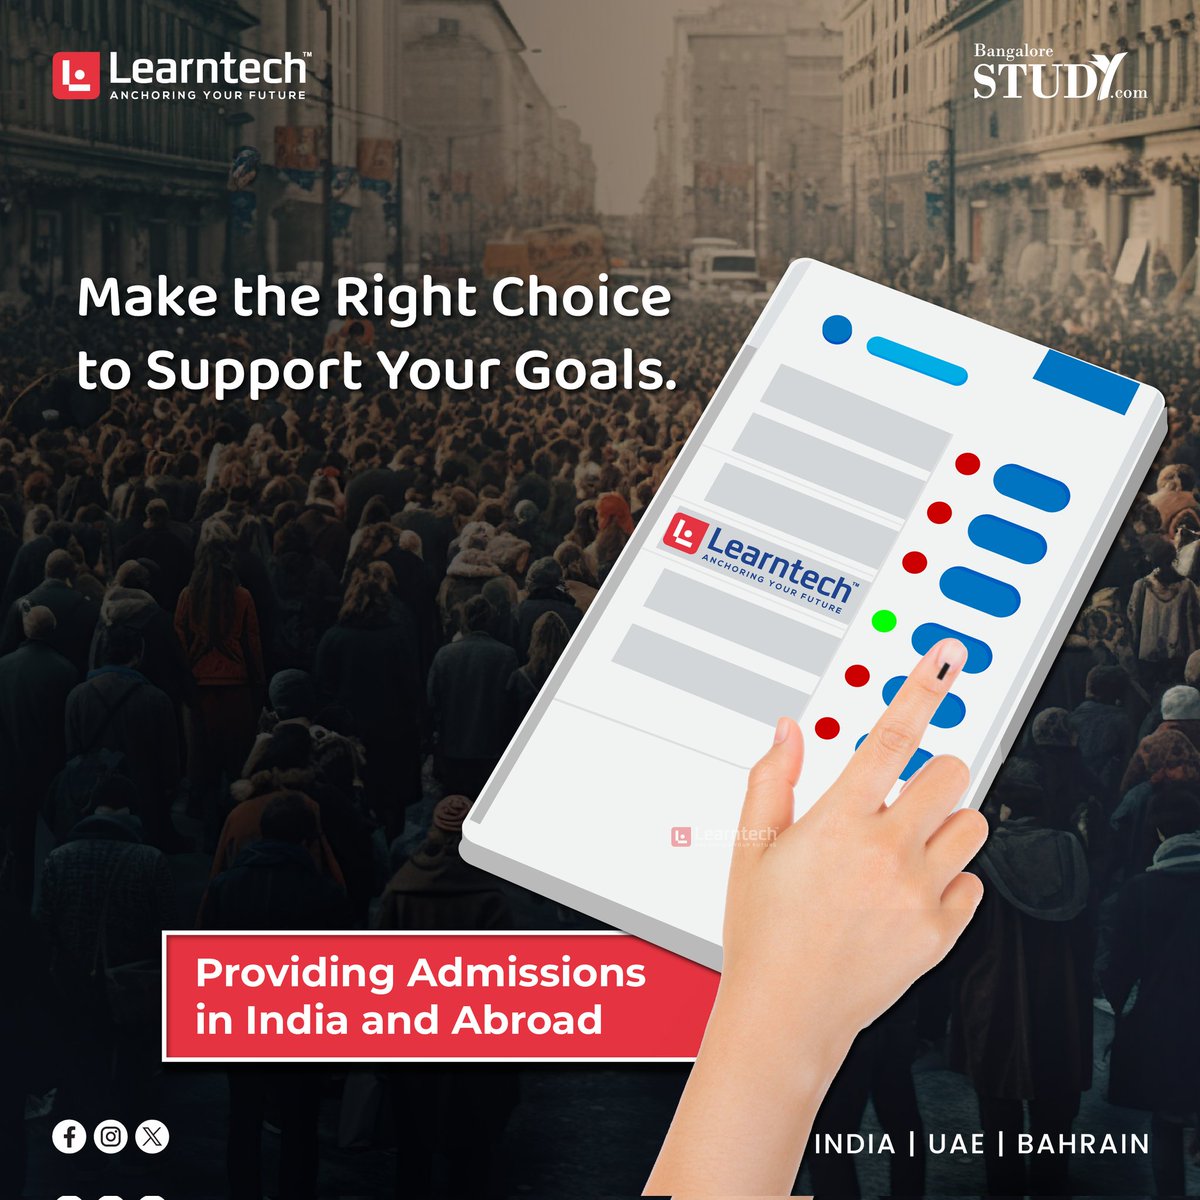 Choose the one that shares your vision and mission. Choose Learntech.
Toll Free: 1800 120 8696

#Learntech #admissions